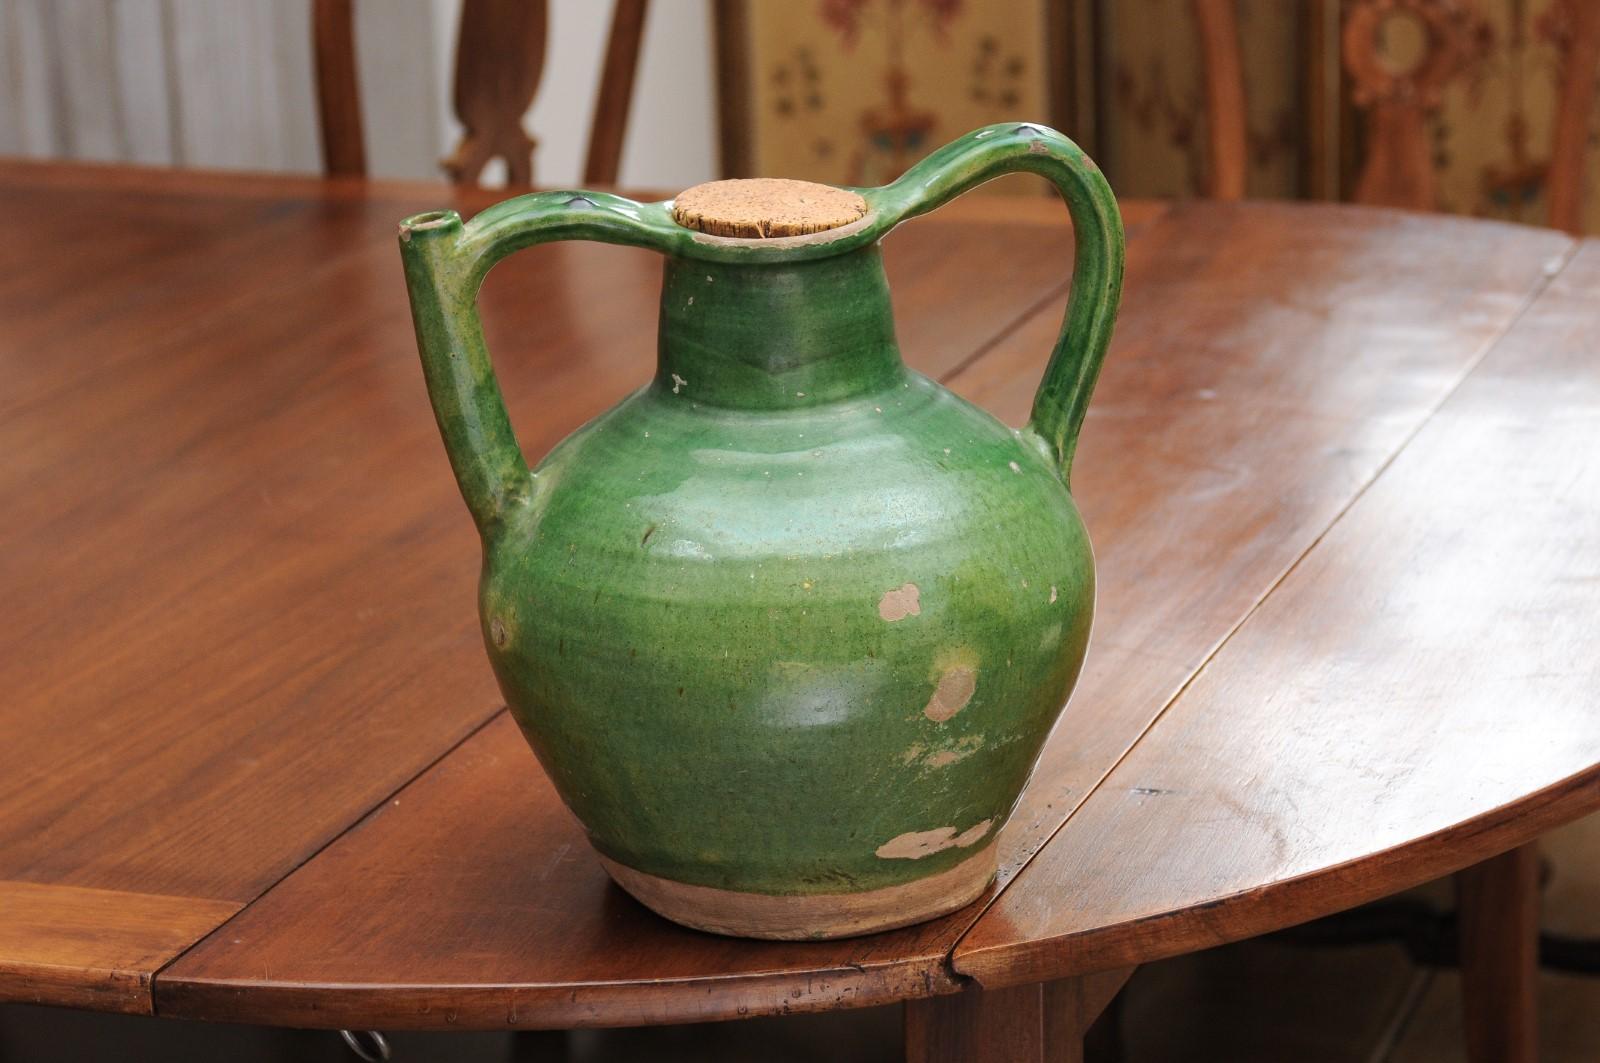 A French Provincial green glazed pottery pitcher from the 19th century, with double handle, cork top, front spout and distressed patina. Created in Southern France during the 19th century, this pitcher features a green glazed body showcasing a